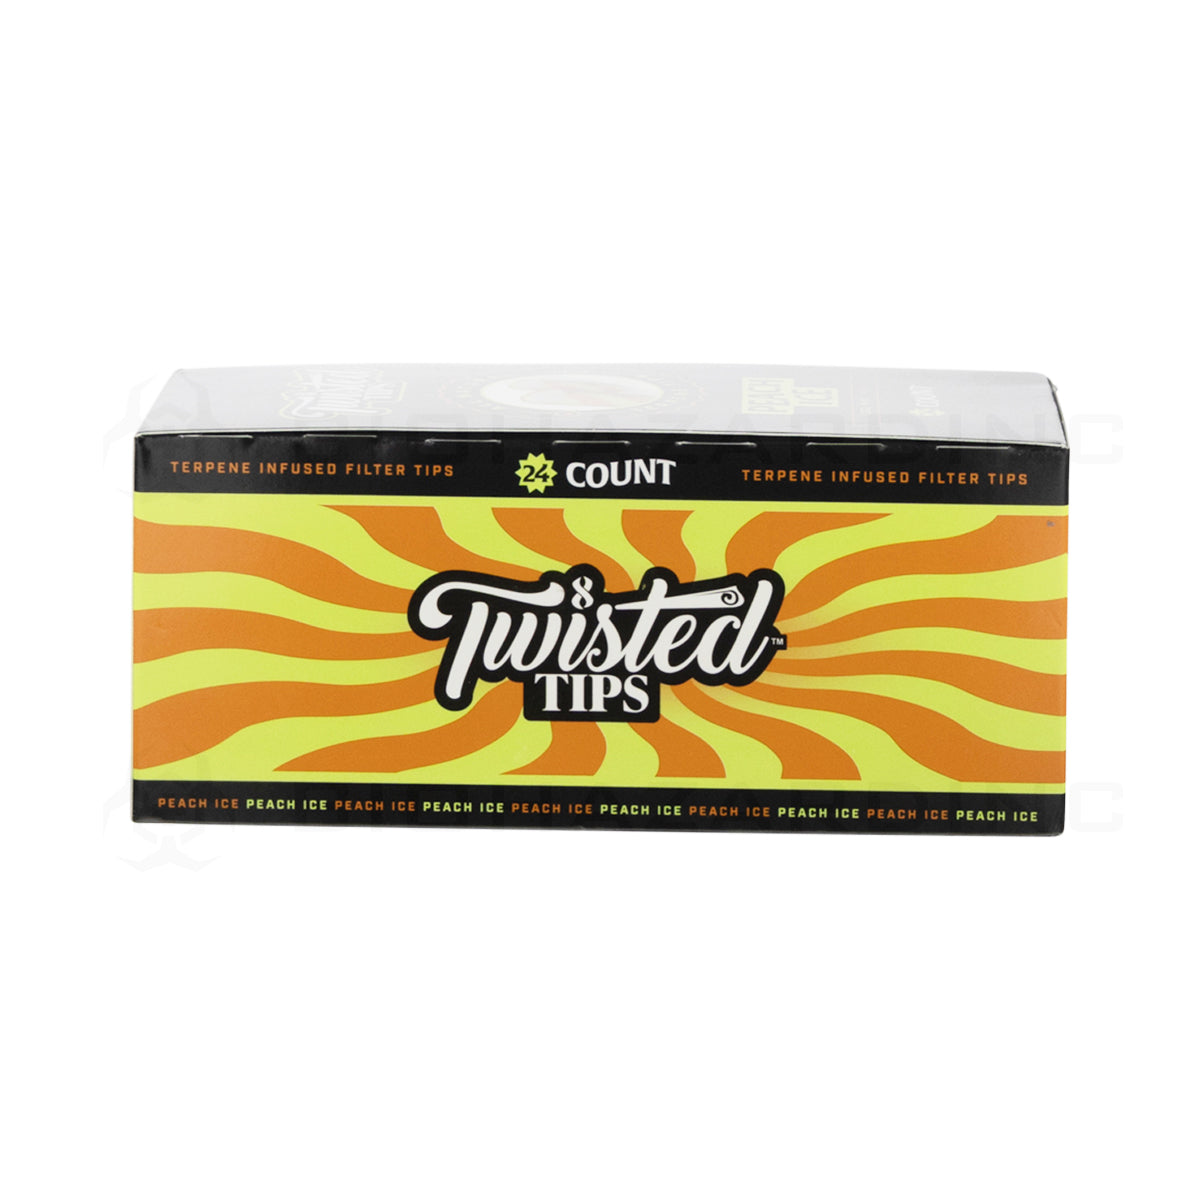 Twisted Tips | 'Retail Display' Terpene Infused 2 Packs | 24 Count Paper Tips Twisted Hemp   